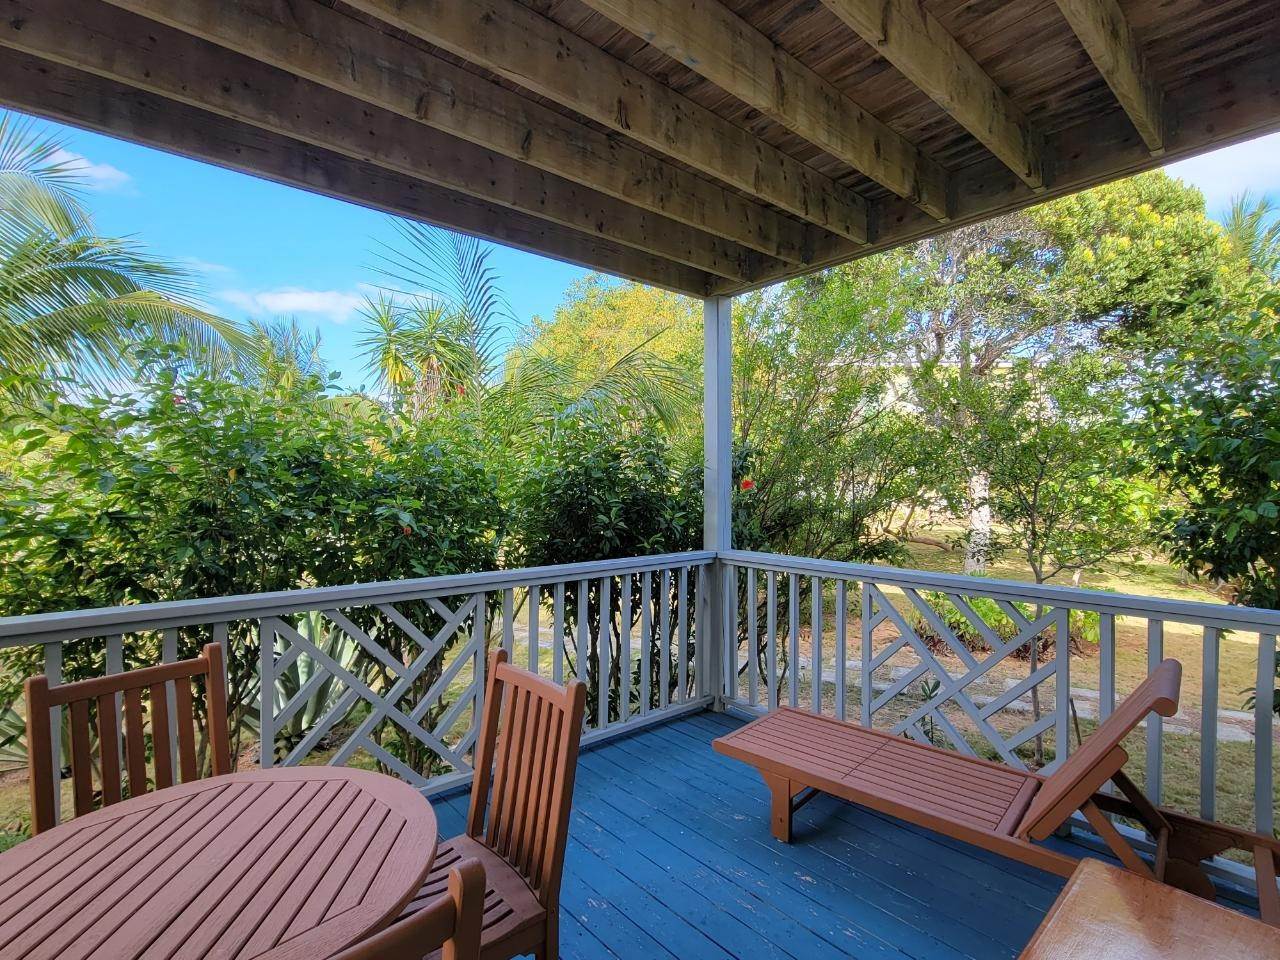 11. Condo for Sale at Governors Harbour, Eleuthera Bahamas